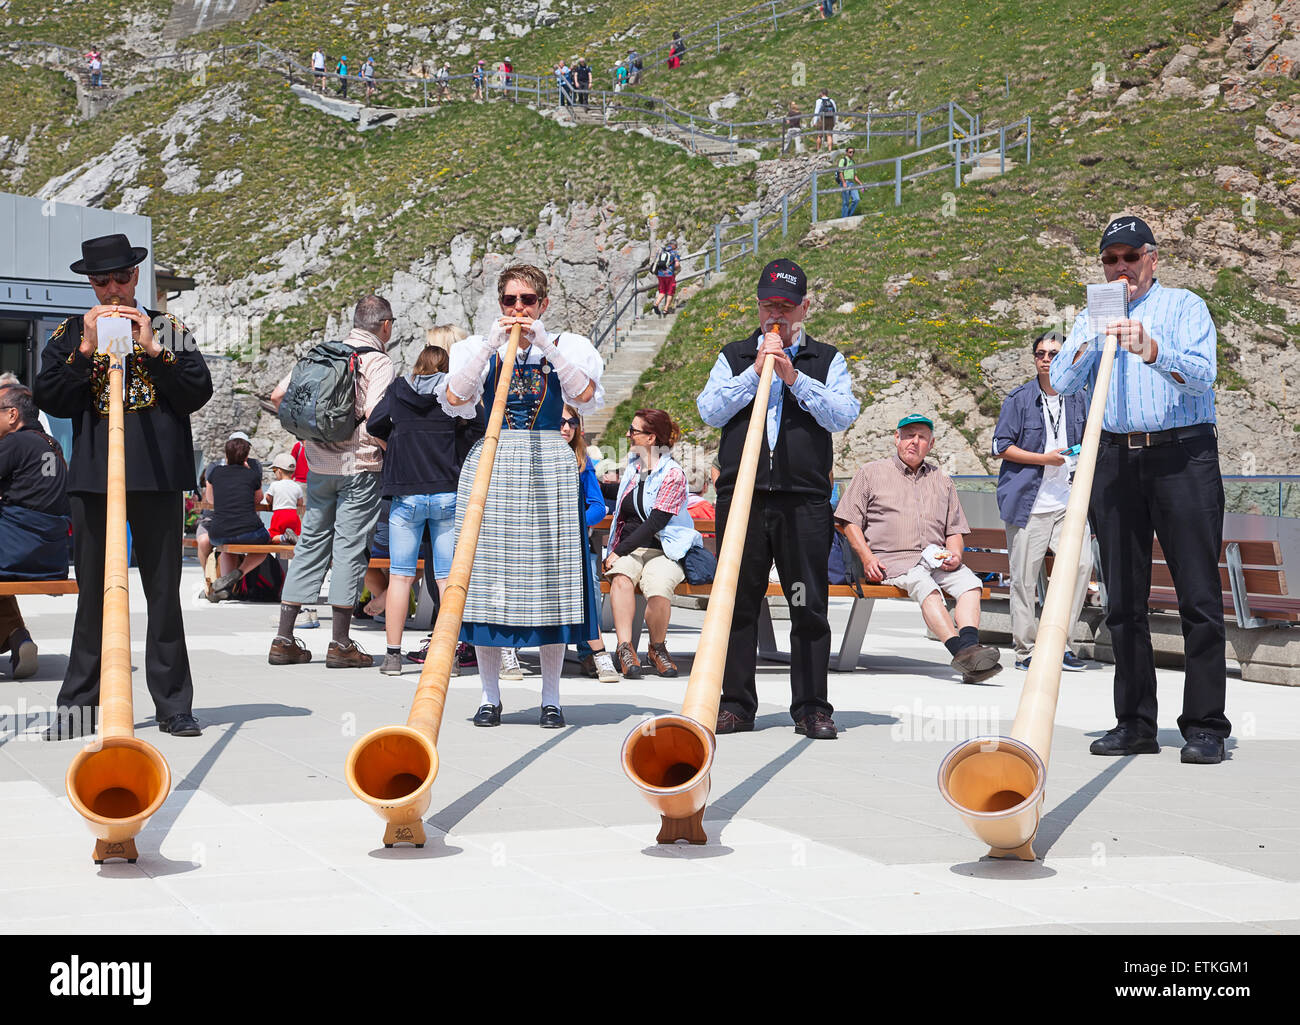 MOUNT PILATUS - JULY 13: Unidentified people playing traditional swiss music with alphorns on July 13, 2013 on the top of Pilatu Stock Photo